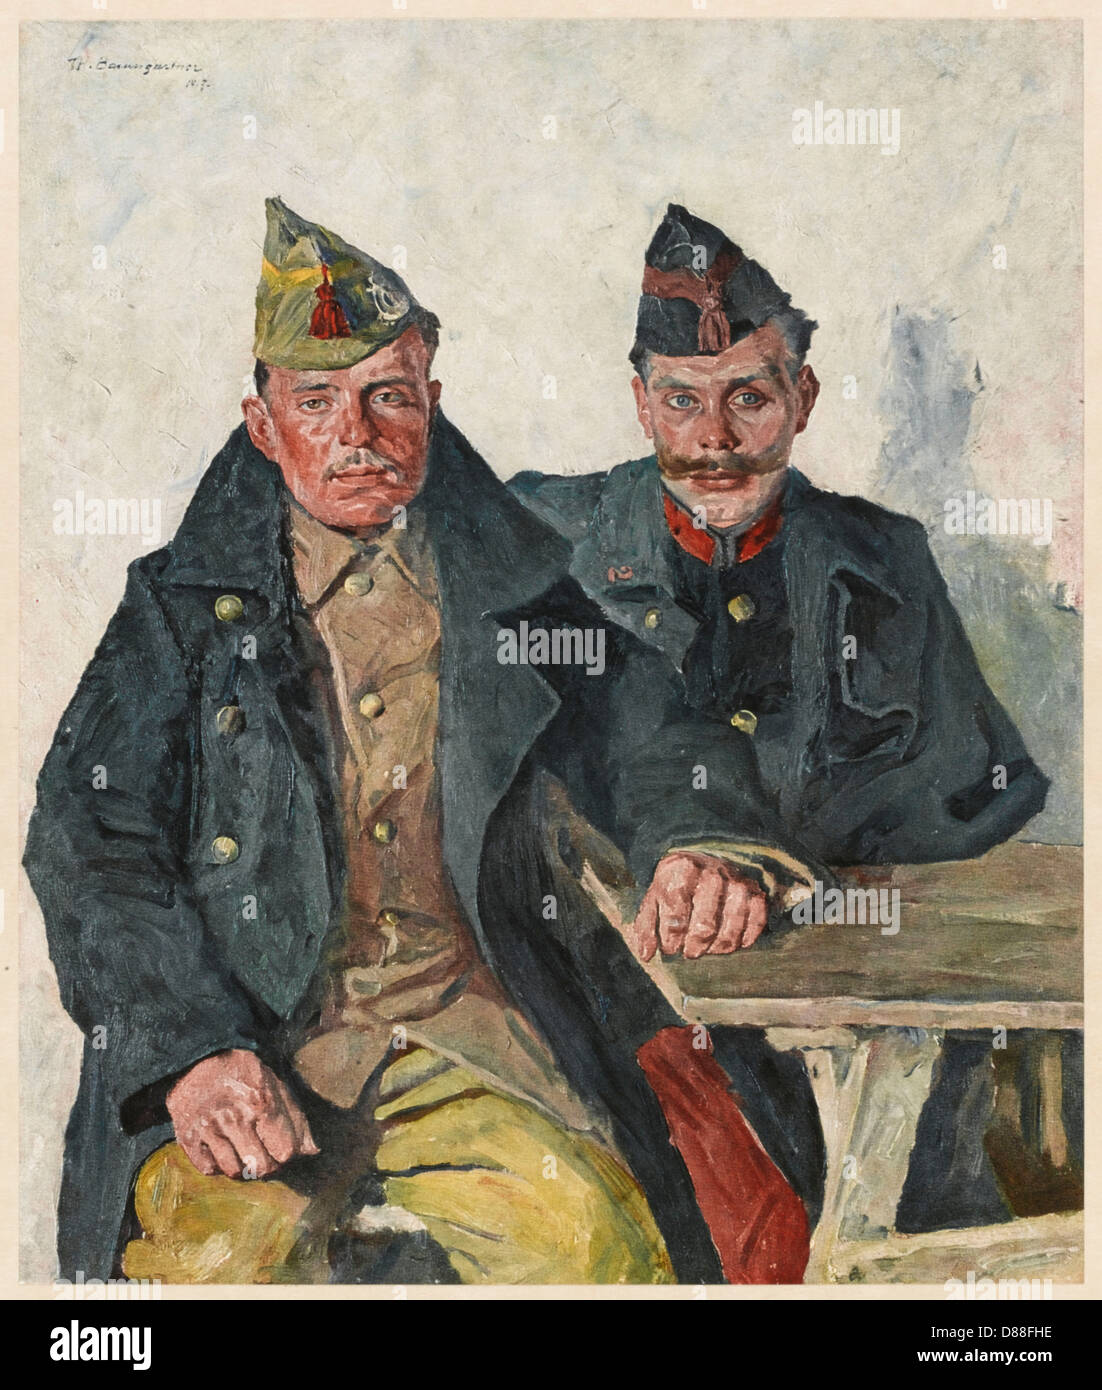 WWI BELGIAN SOLDIERS Stock Photo